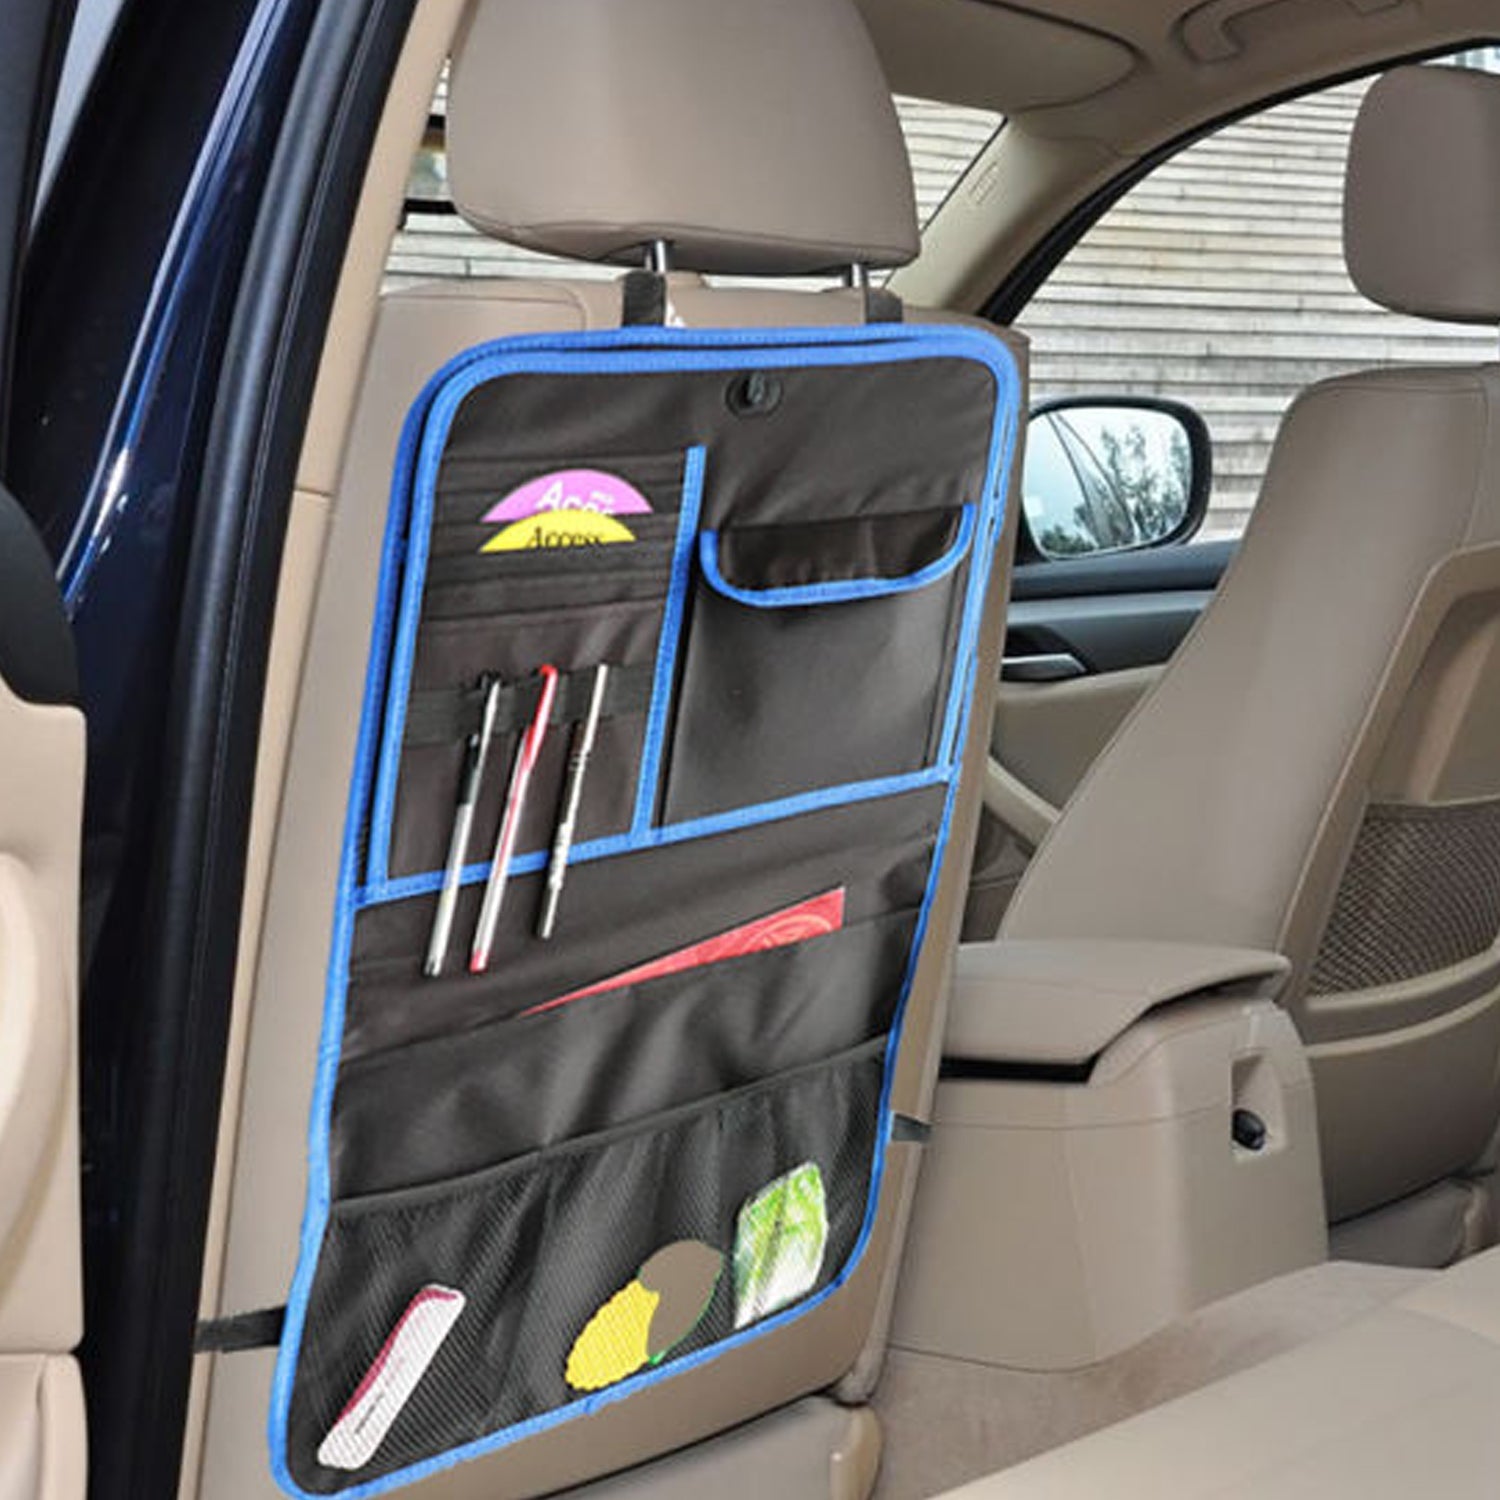 6302 Car Back Seat Organiser used in all types of cars with their car seats to cover them easily. DeoDap